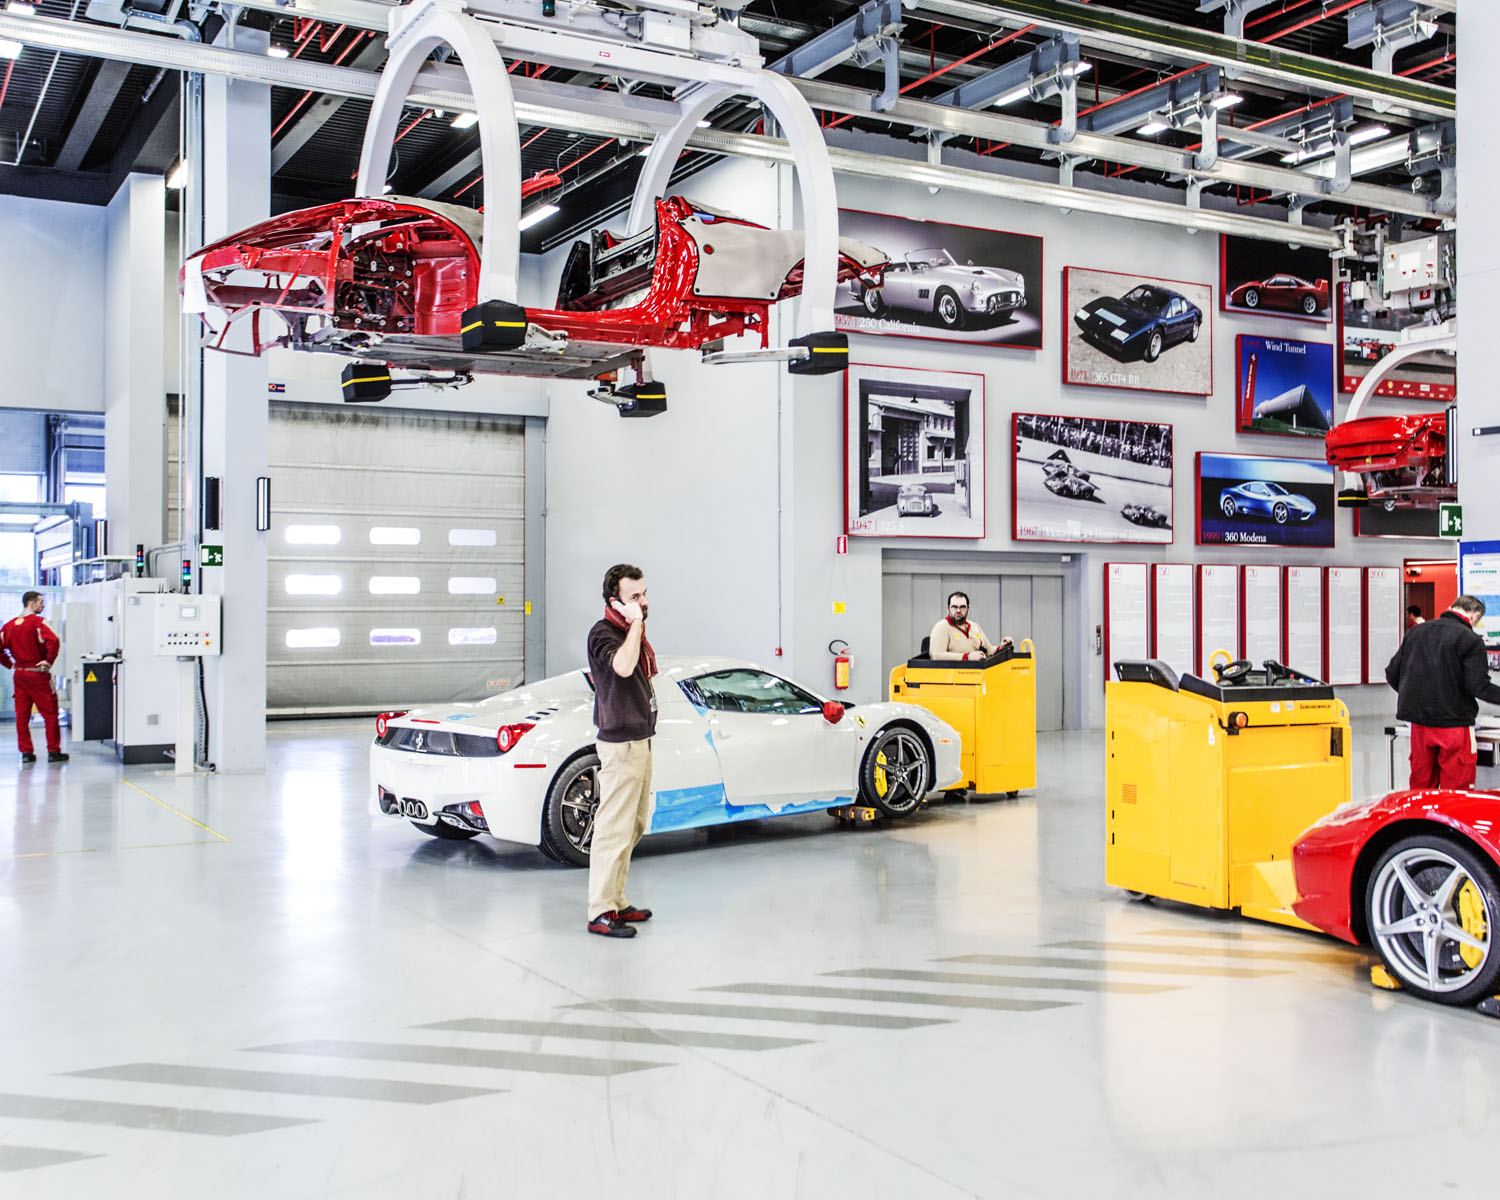 The Ferrari assemly line inside the cittadella of Maranello, Modena- Italy. The New Assembly Line area from the pen of Jean Nouvel, where technological excellence and meticulous craftsmanship combine the 8 and 12-cylinder cars assembled in a light-filled, transparent space also enriched by green areas.